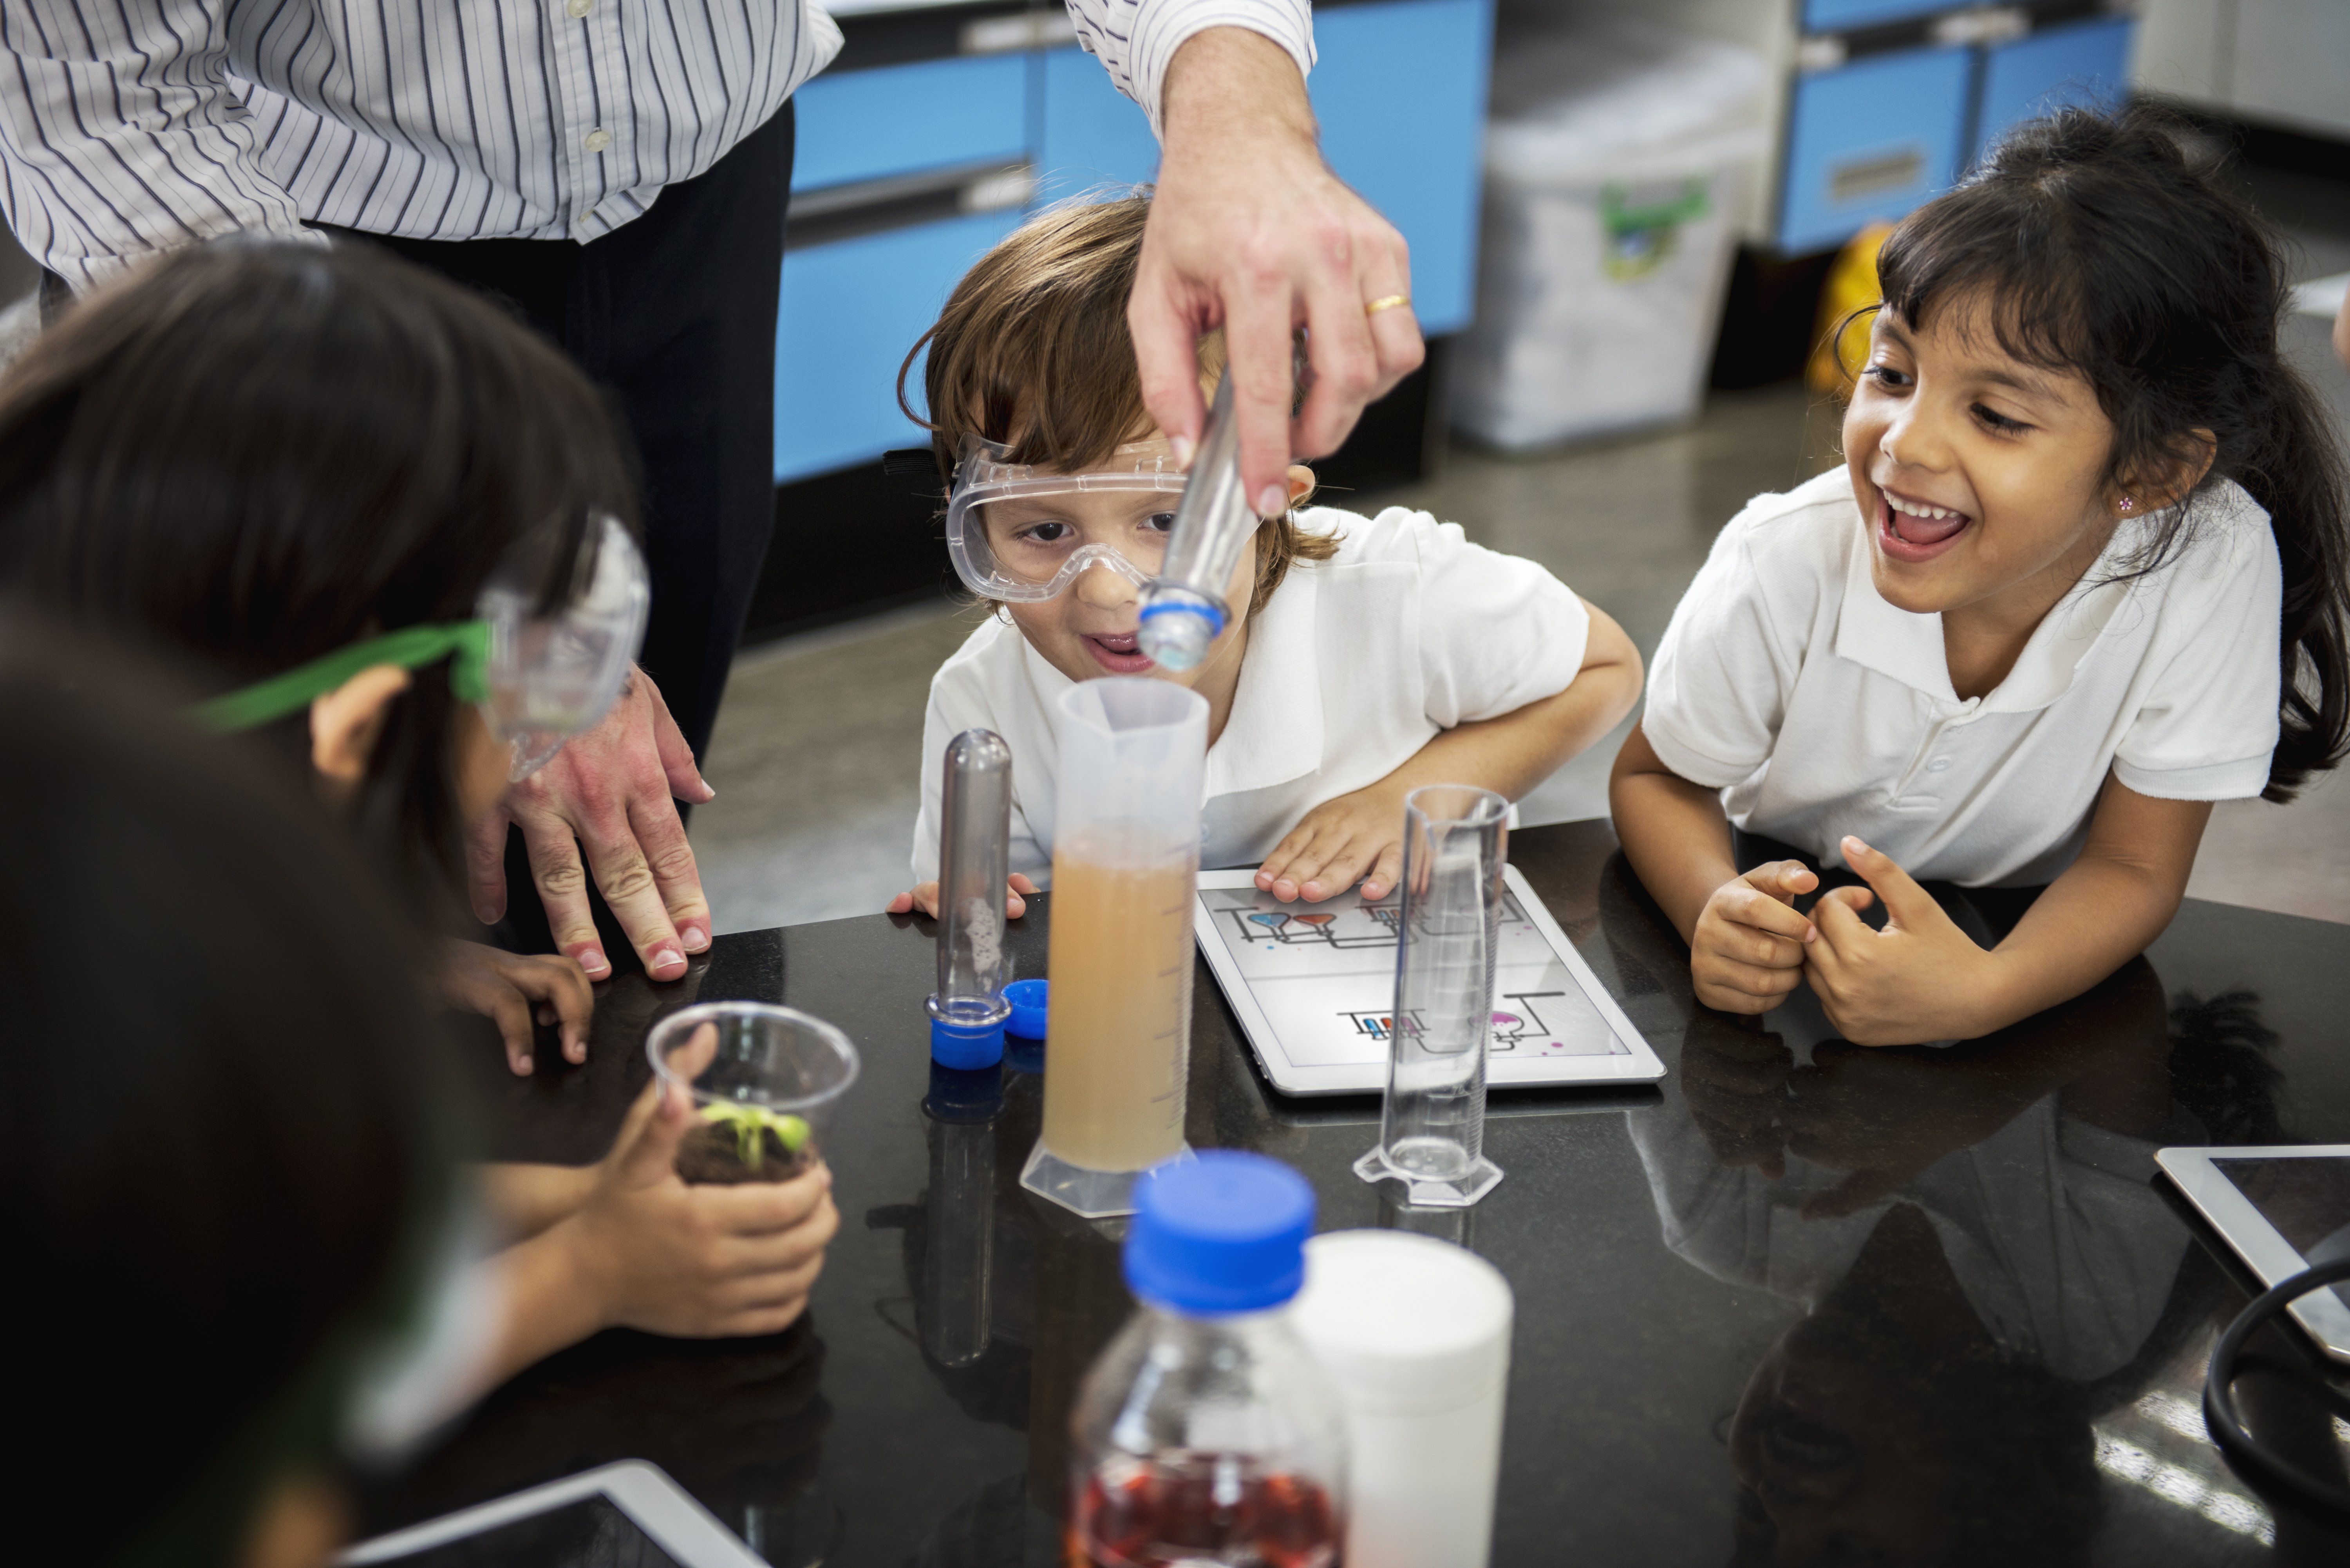 How STEM Education Can Shape the Future